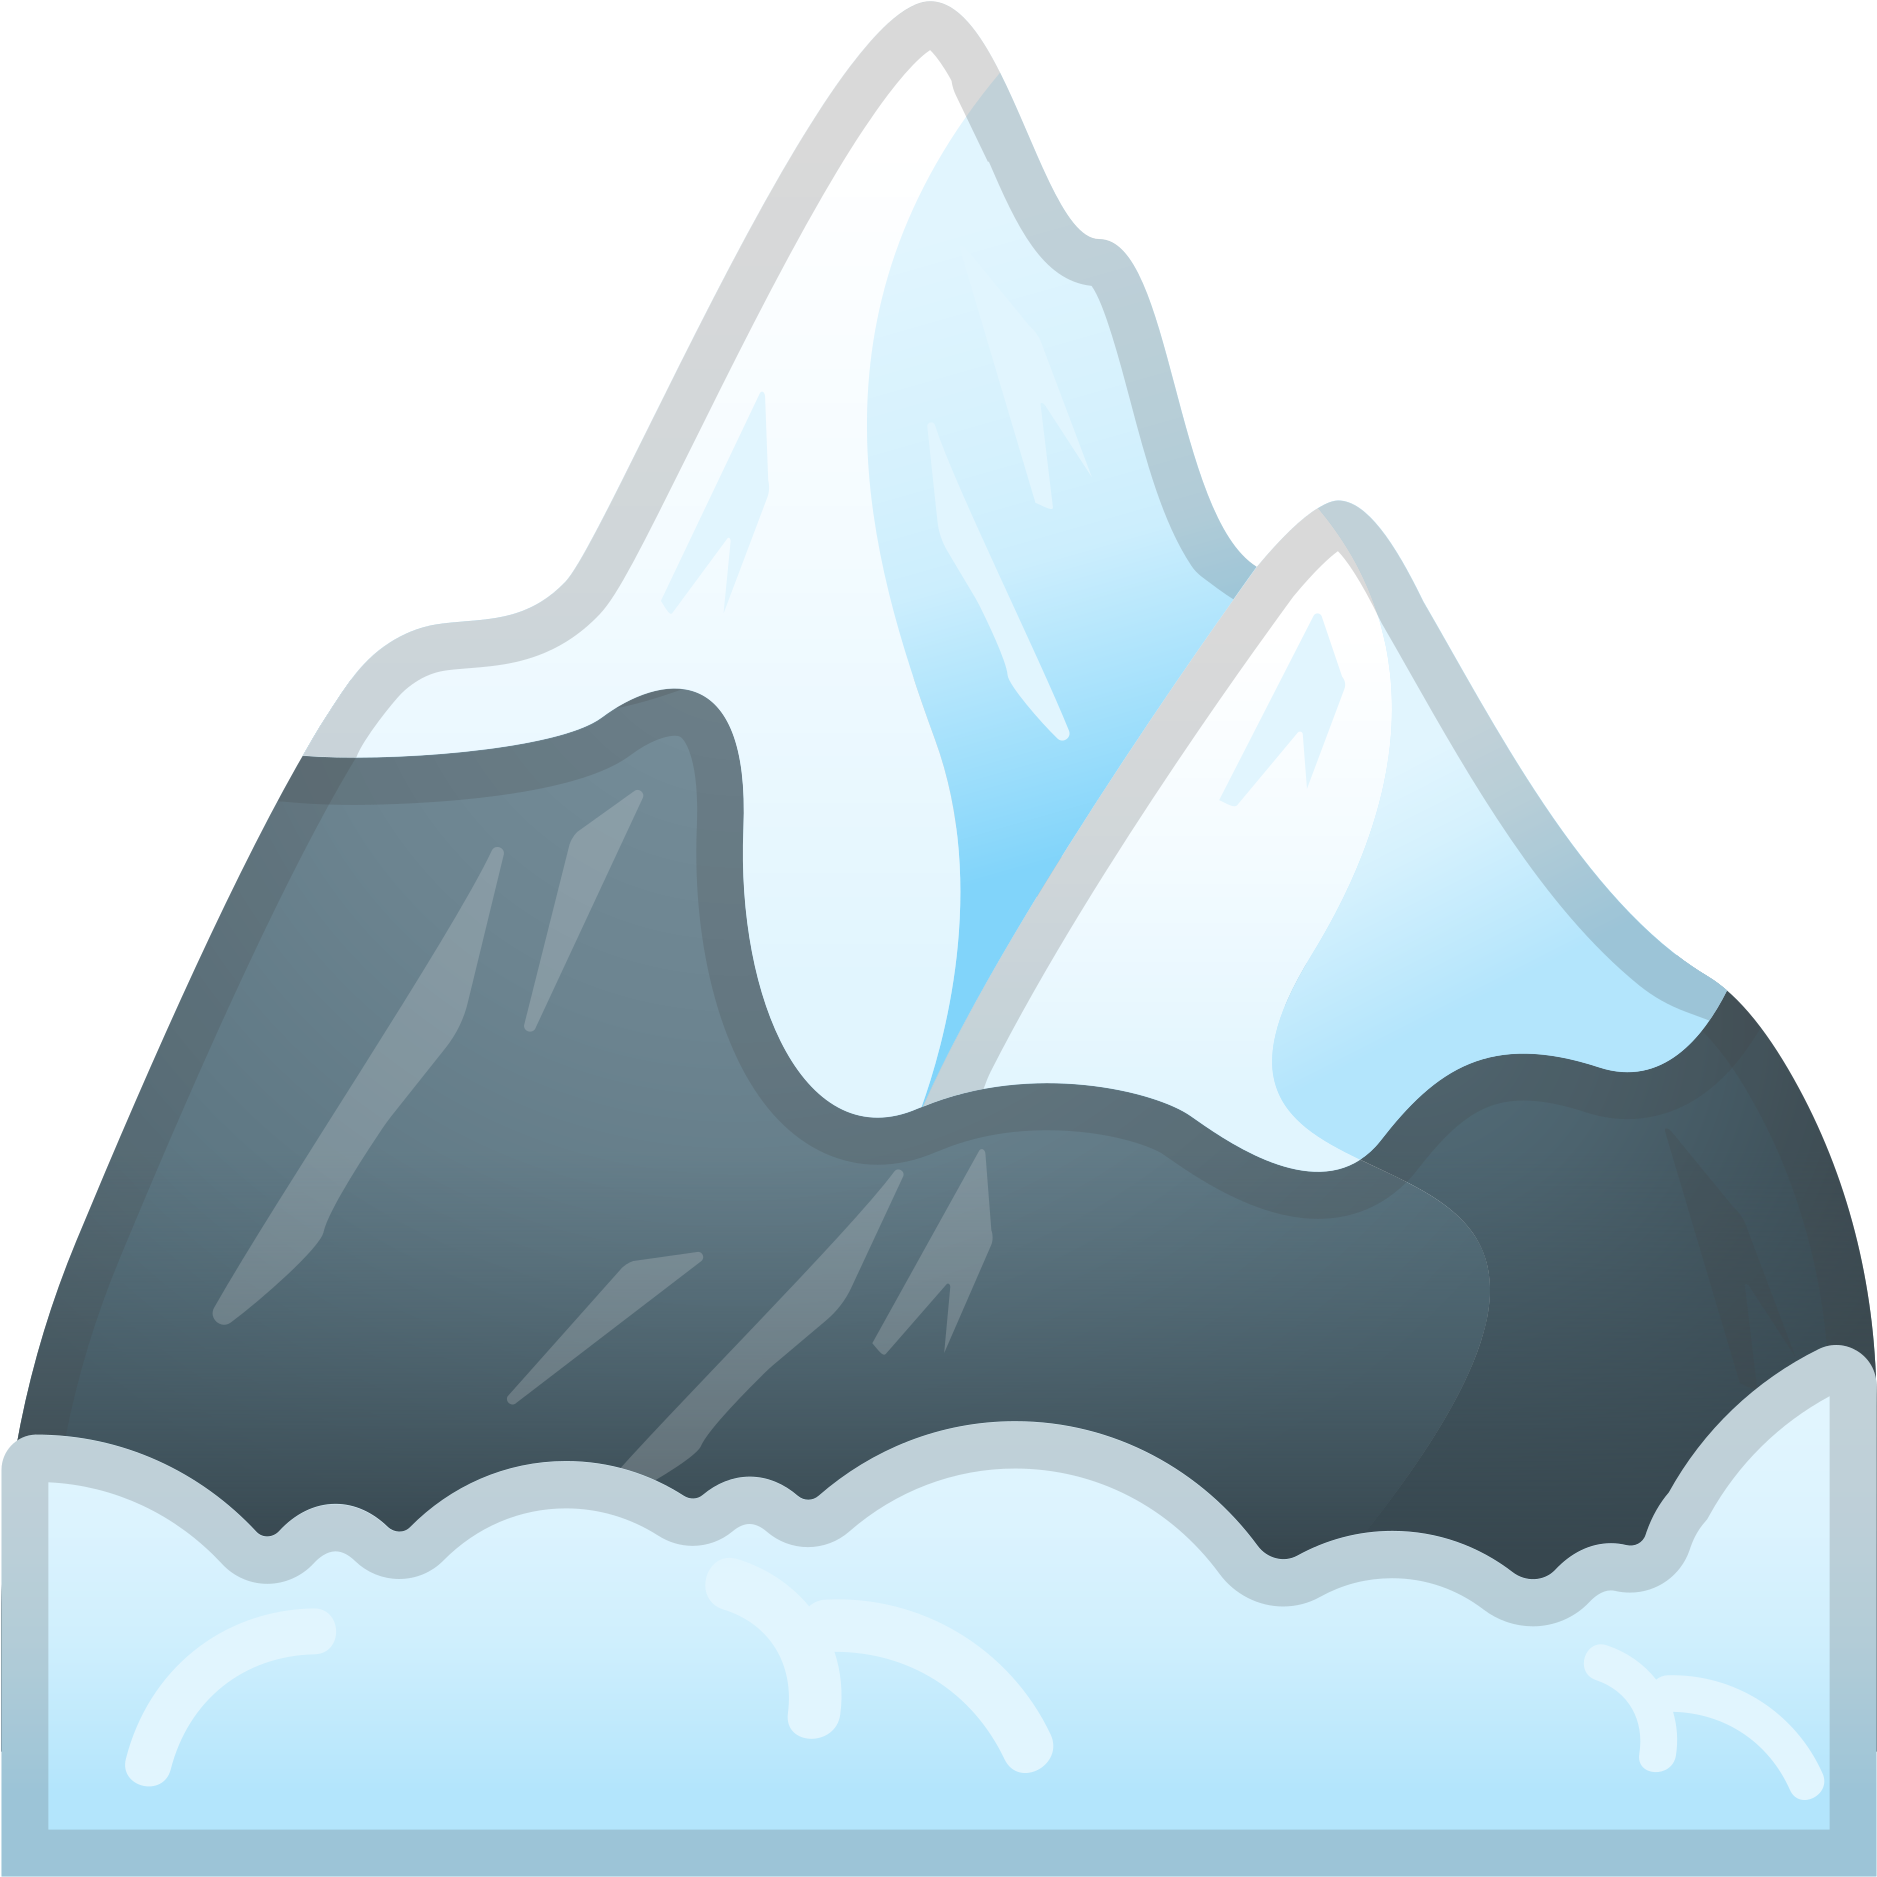 Snowy Mountain Peaks Vector Illustration PNG image